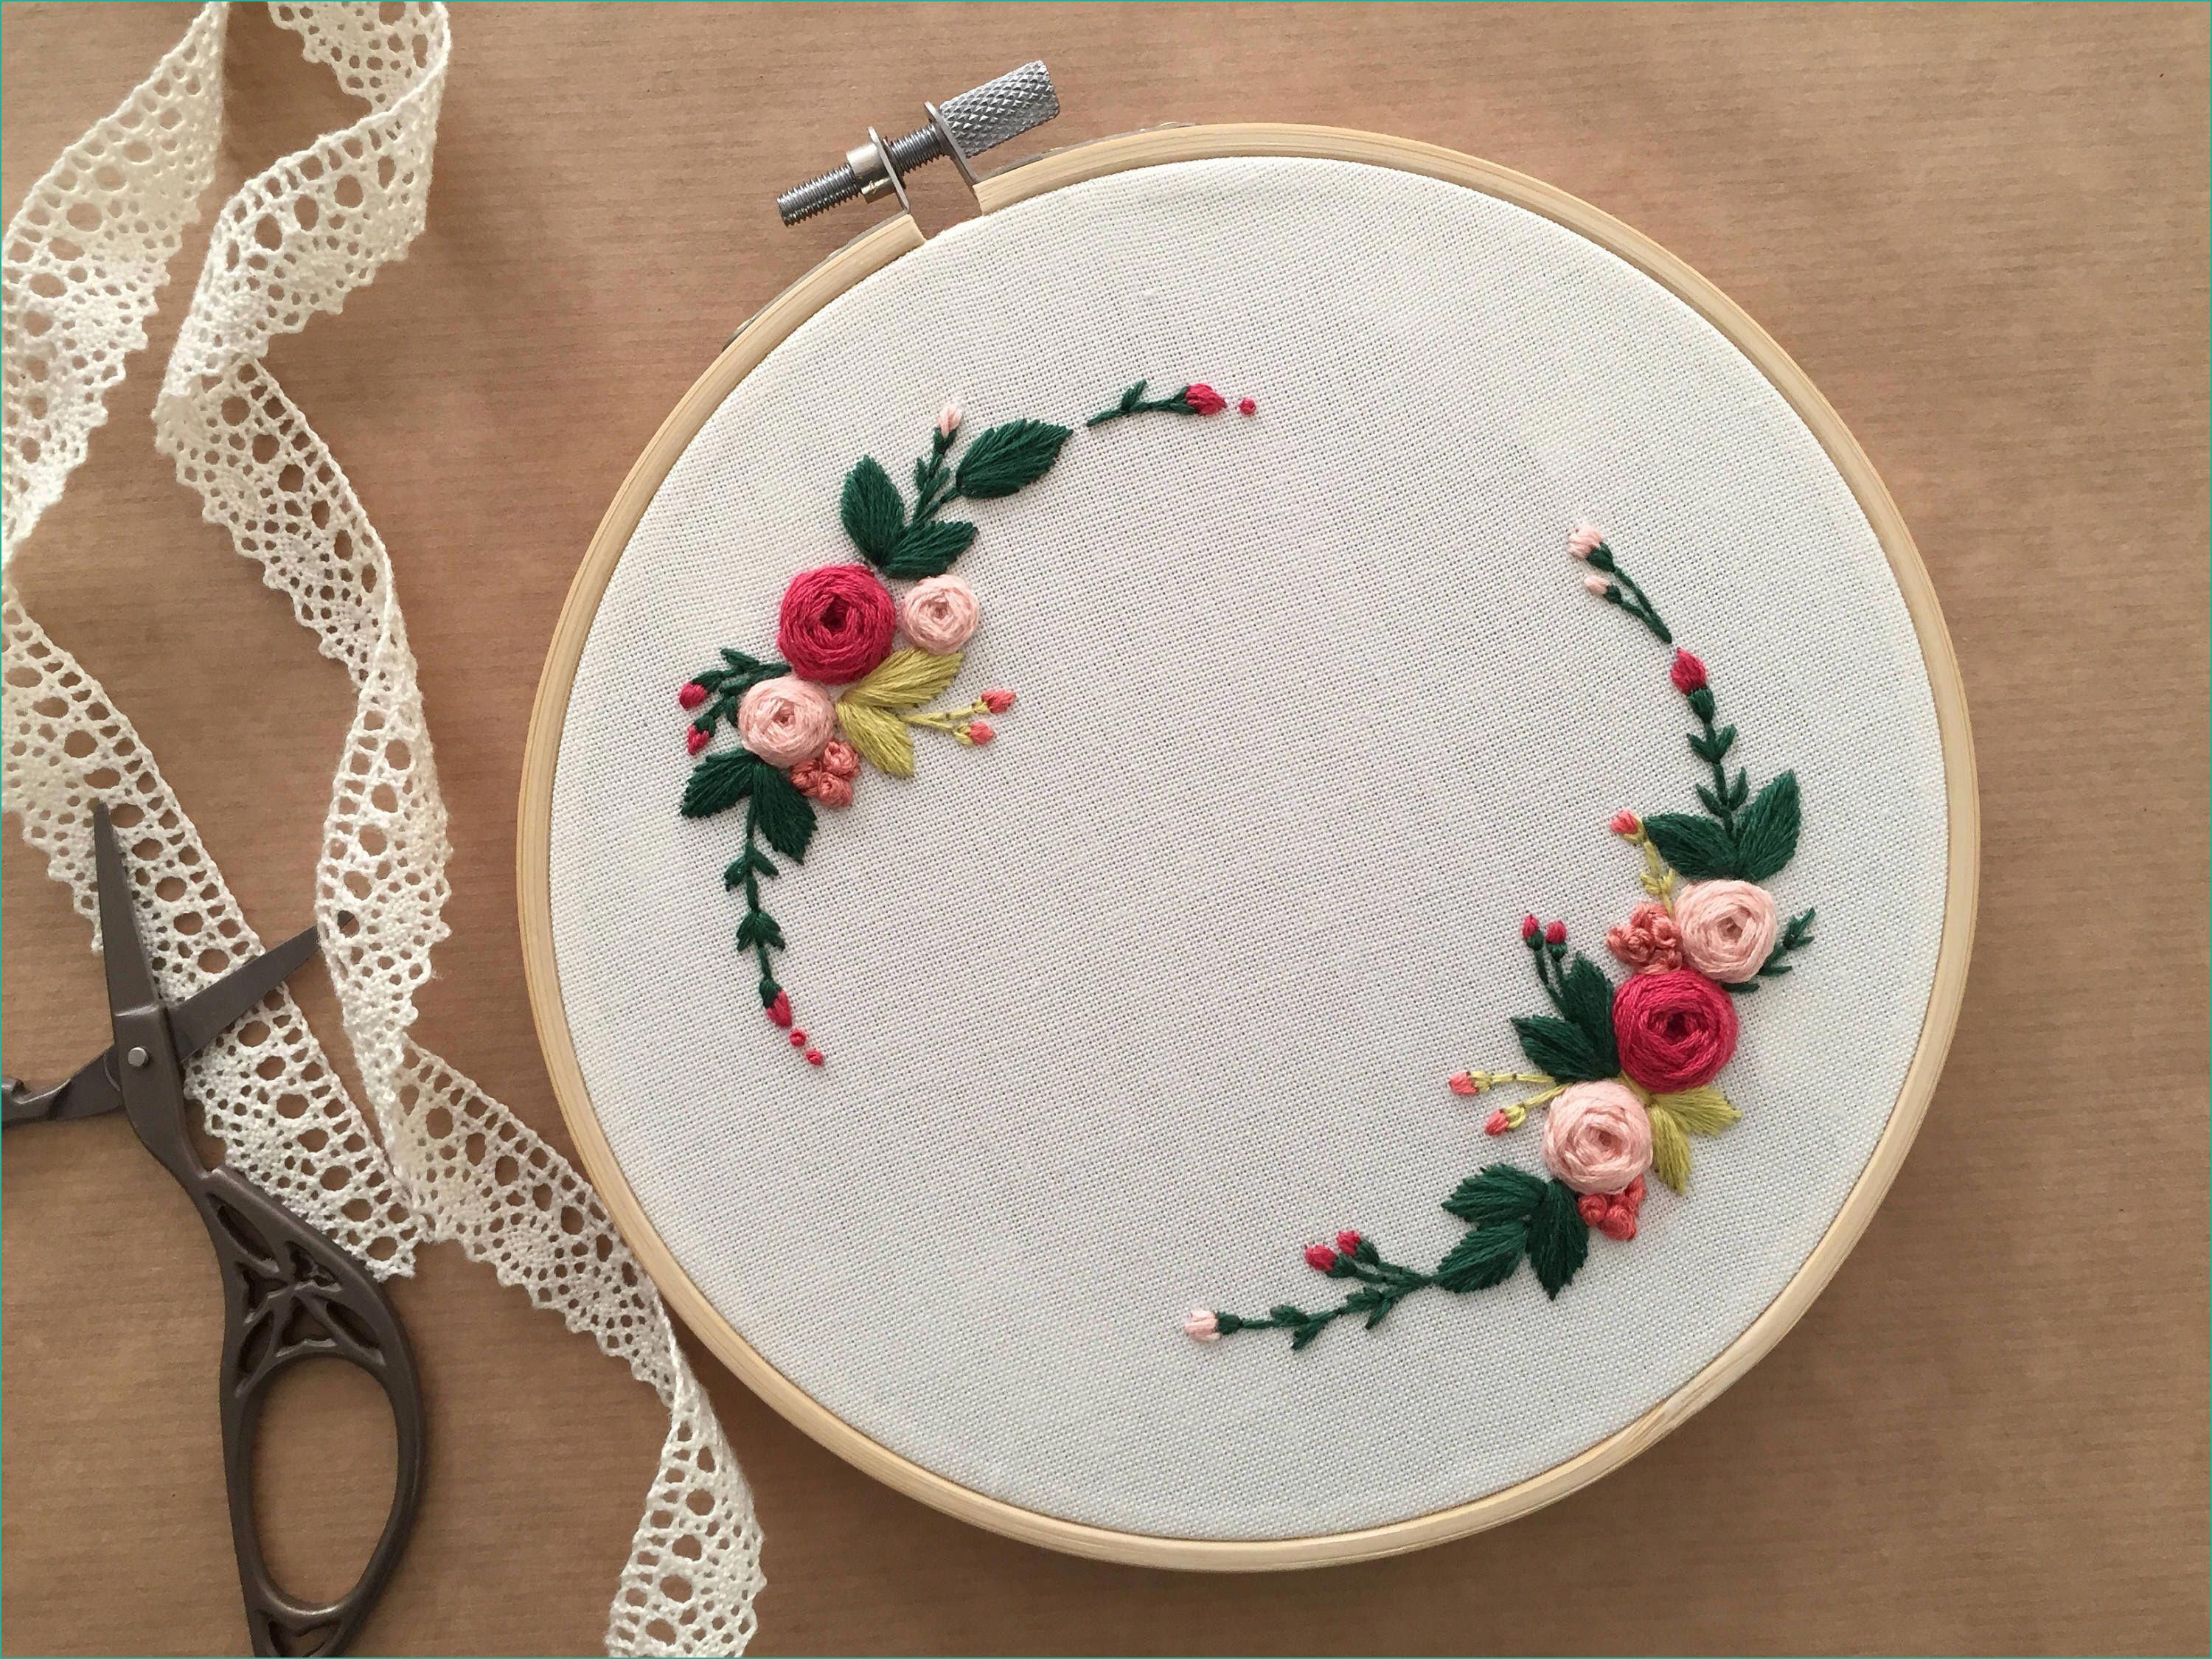 Hand Embroidery Letter Patterns Hand Embroidery Letters Patterns Free Fresh 79 O Handembroidery